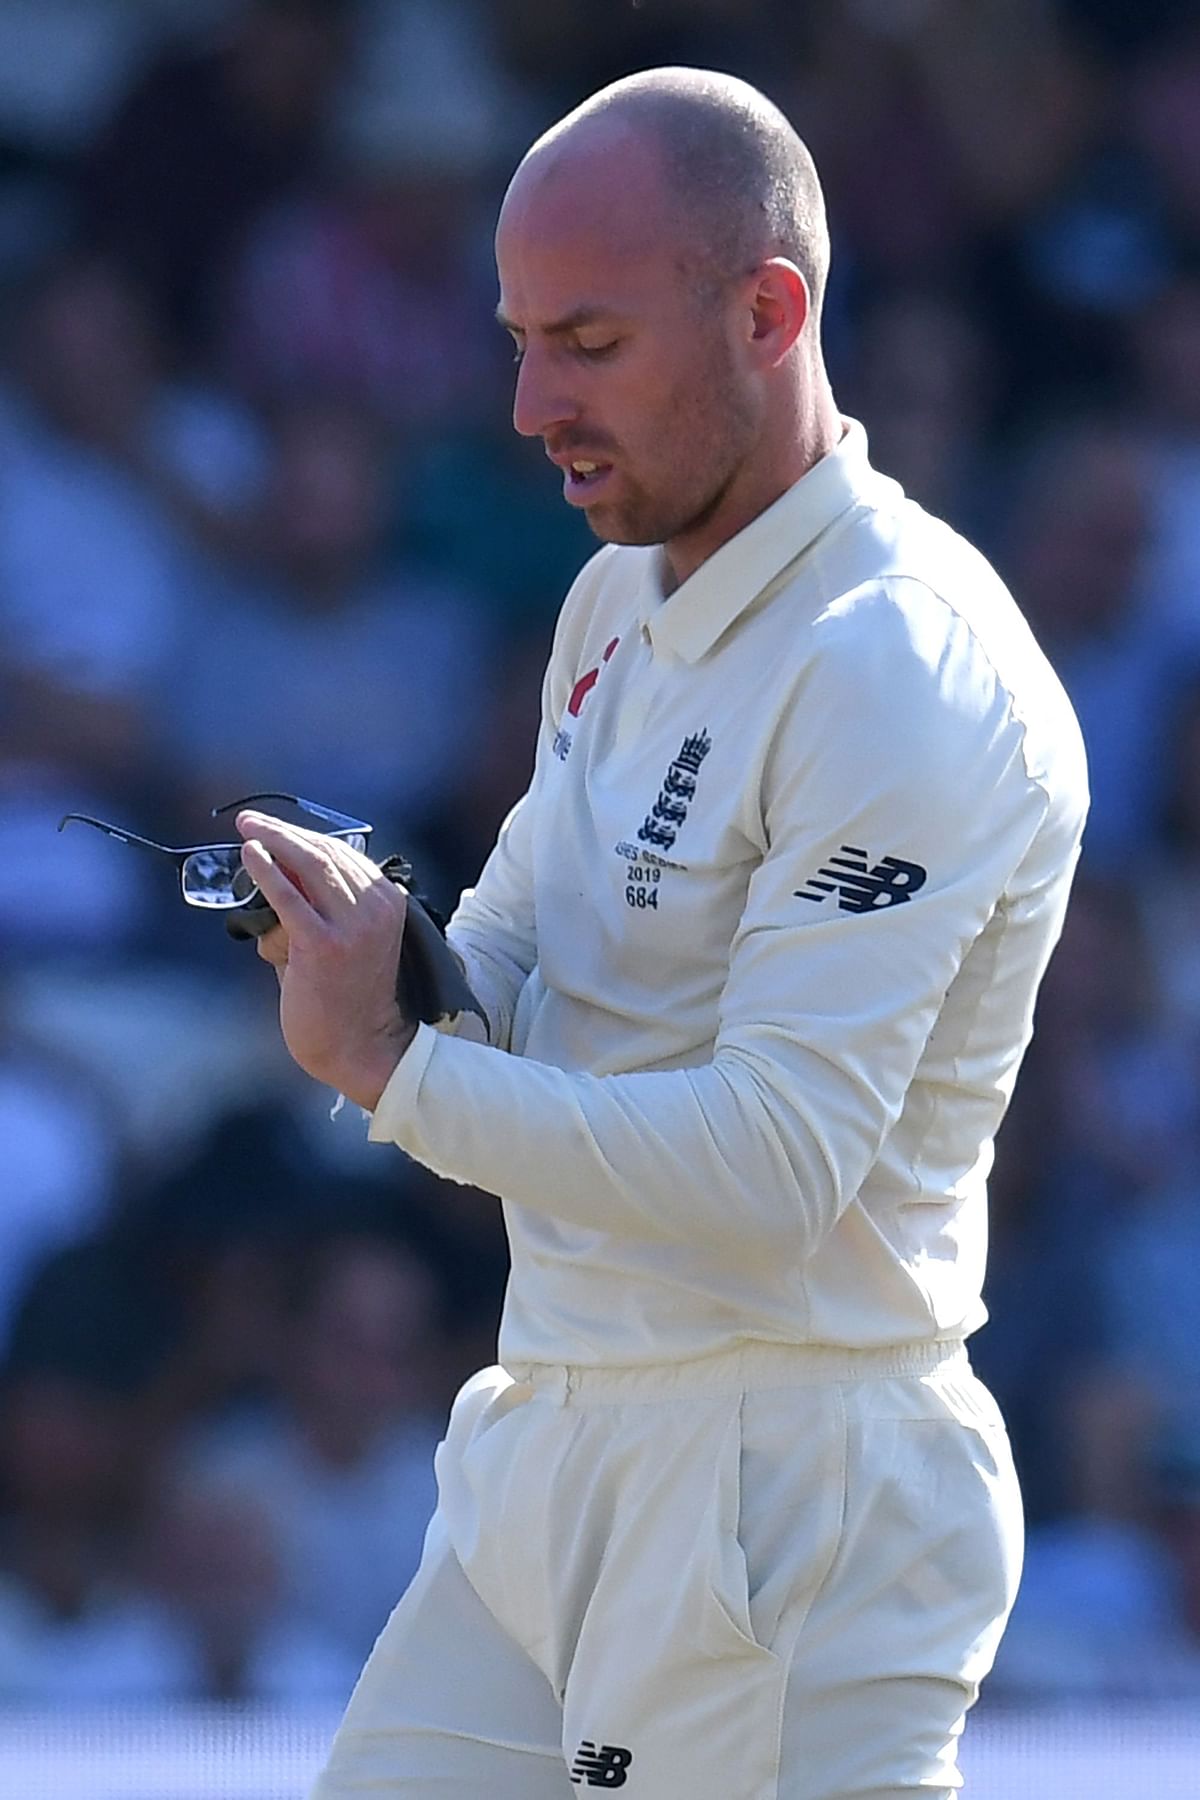 England`s Jack Leach cleans his glasses during a break in play on the fourth day of the third Ashes cricket Test match between England and Australia at Headingley in Leeds, northern England, on 25 August 2019. Photo: AFP